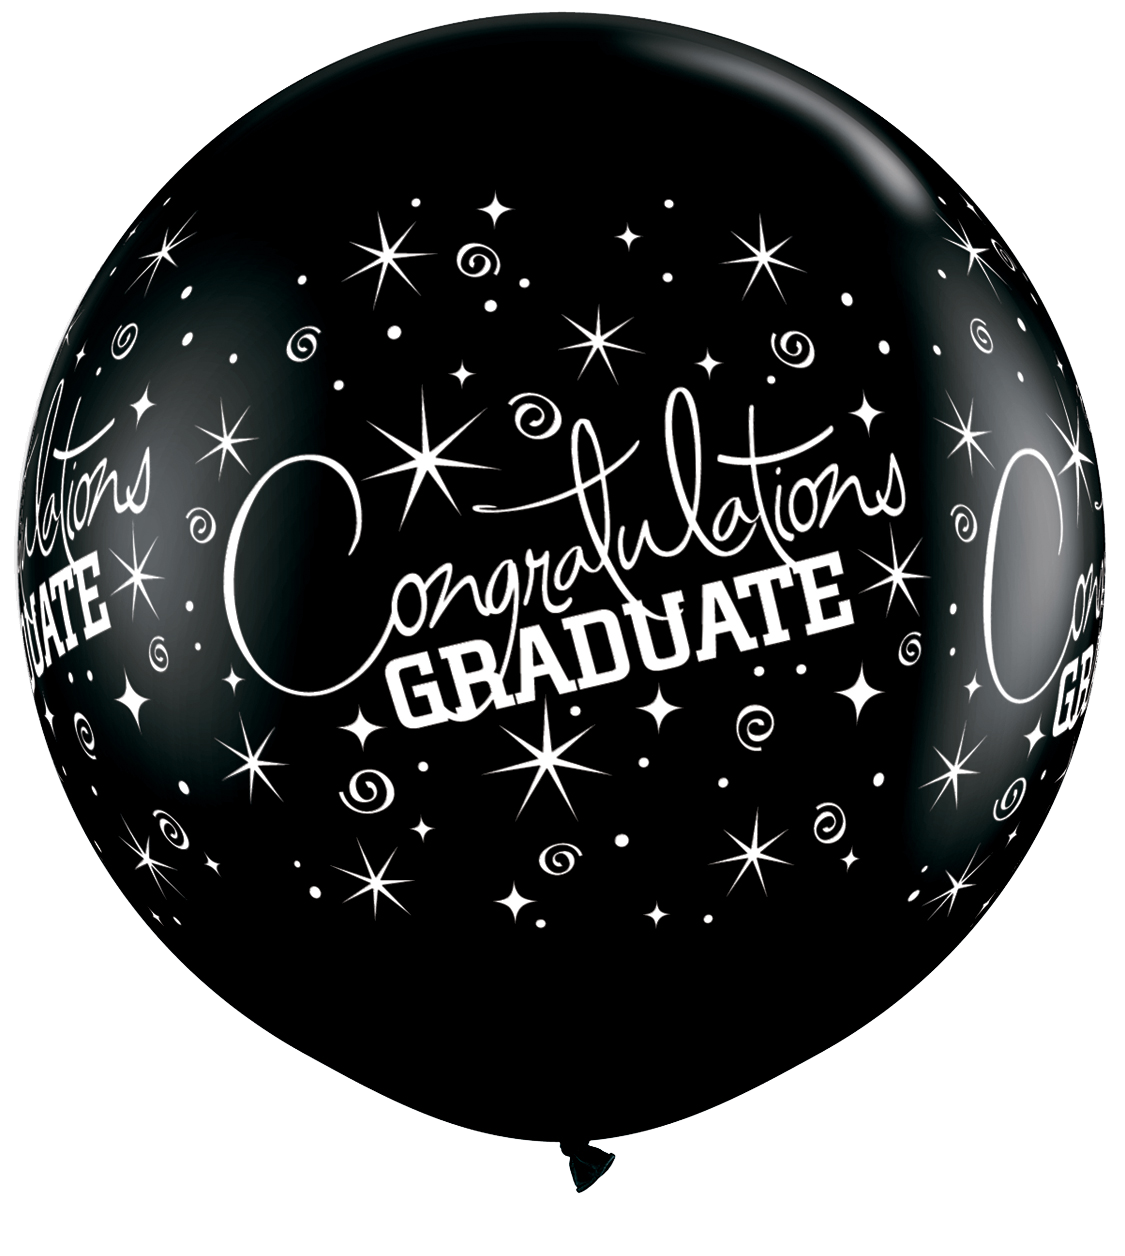 36 Congratulations Graduate Onyx Black 2 Count Bargain Balloons Mylar Balloons And Foil Balloons